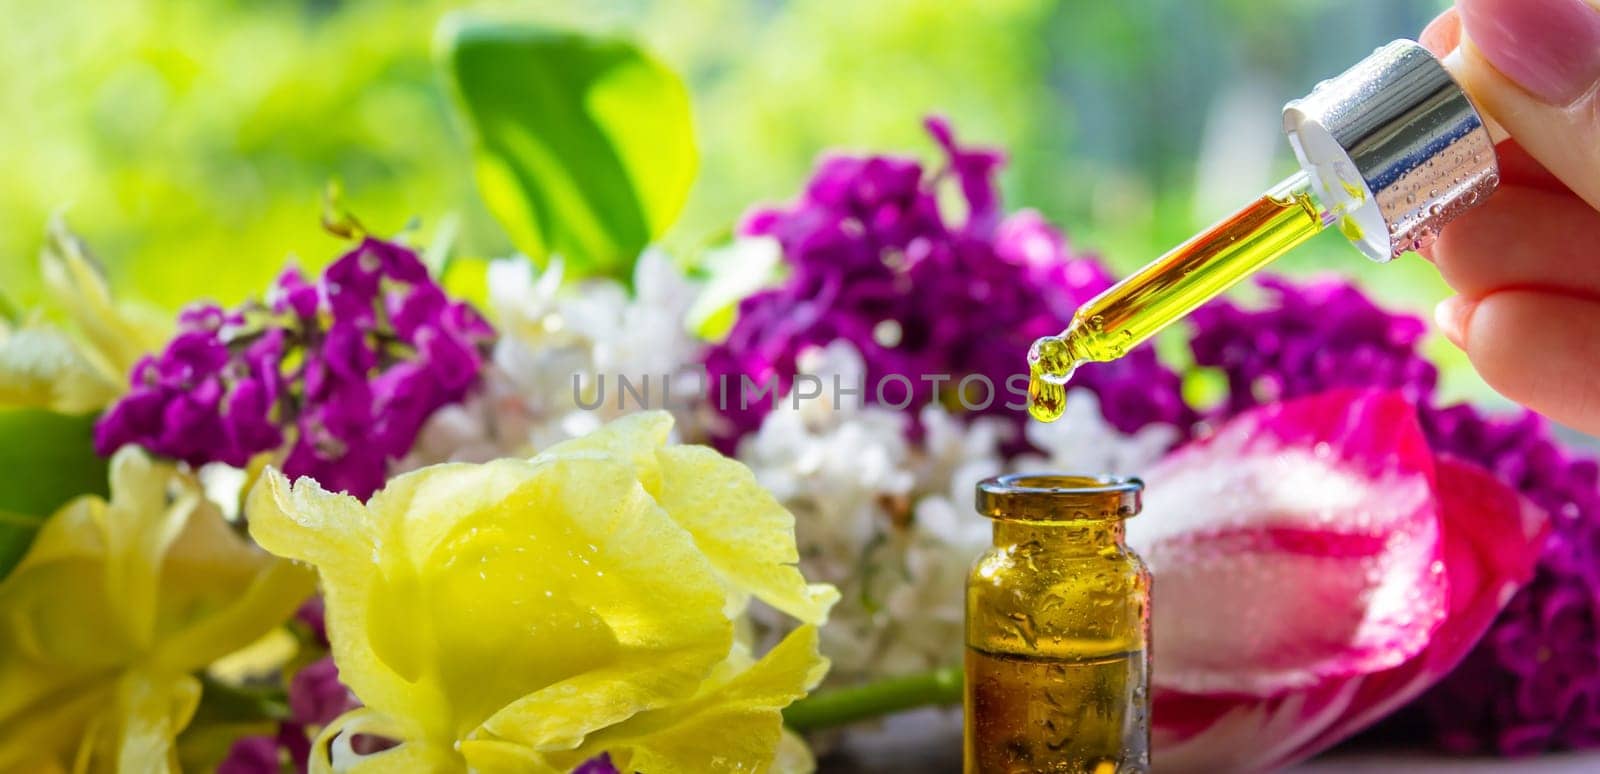 essential oils of various flowers by Anuta23